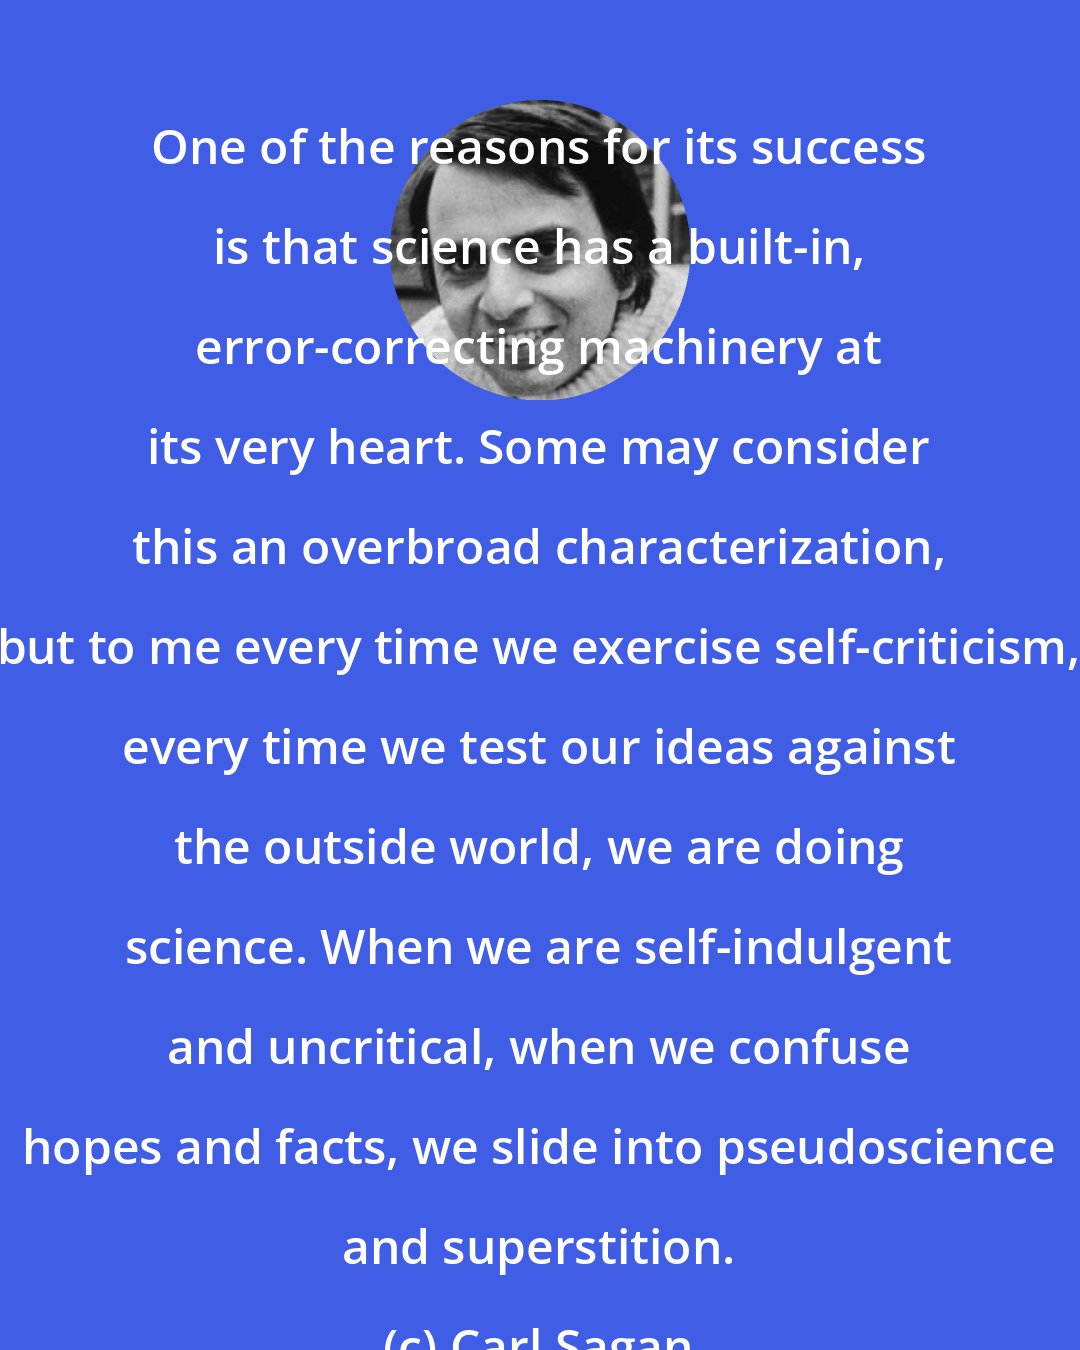 Carl Sagan: One of the reasons for its success is that science has a built-in, error-correcting machinery at its very heart. Some may consider this an overbroad characterization, but to me every time we exercise self-criticism, every time we test our ideas against the outside world, we are doing science. When we are self-indulgent and uncritical, when we confuse hopes and facts, we slide into pseudoscience and superstition.